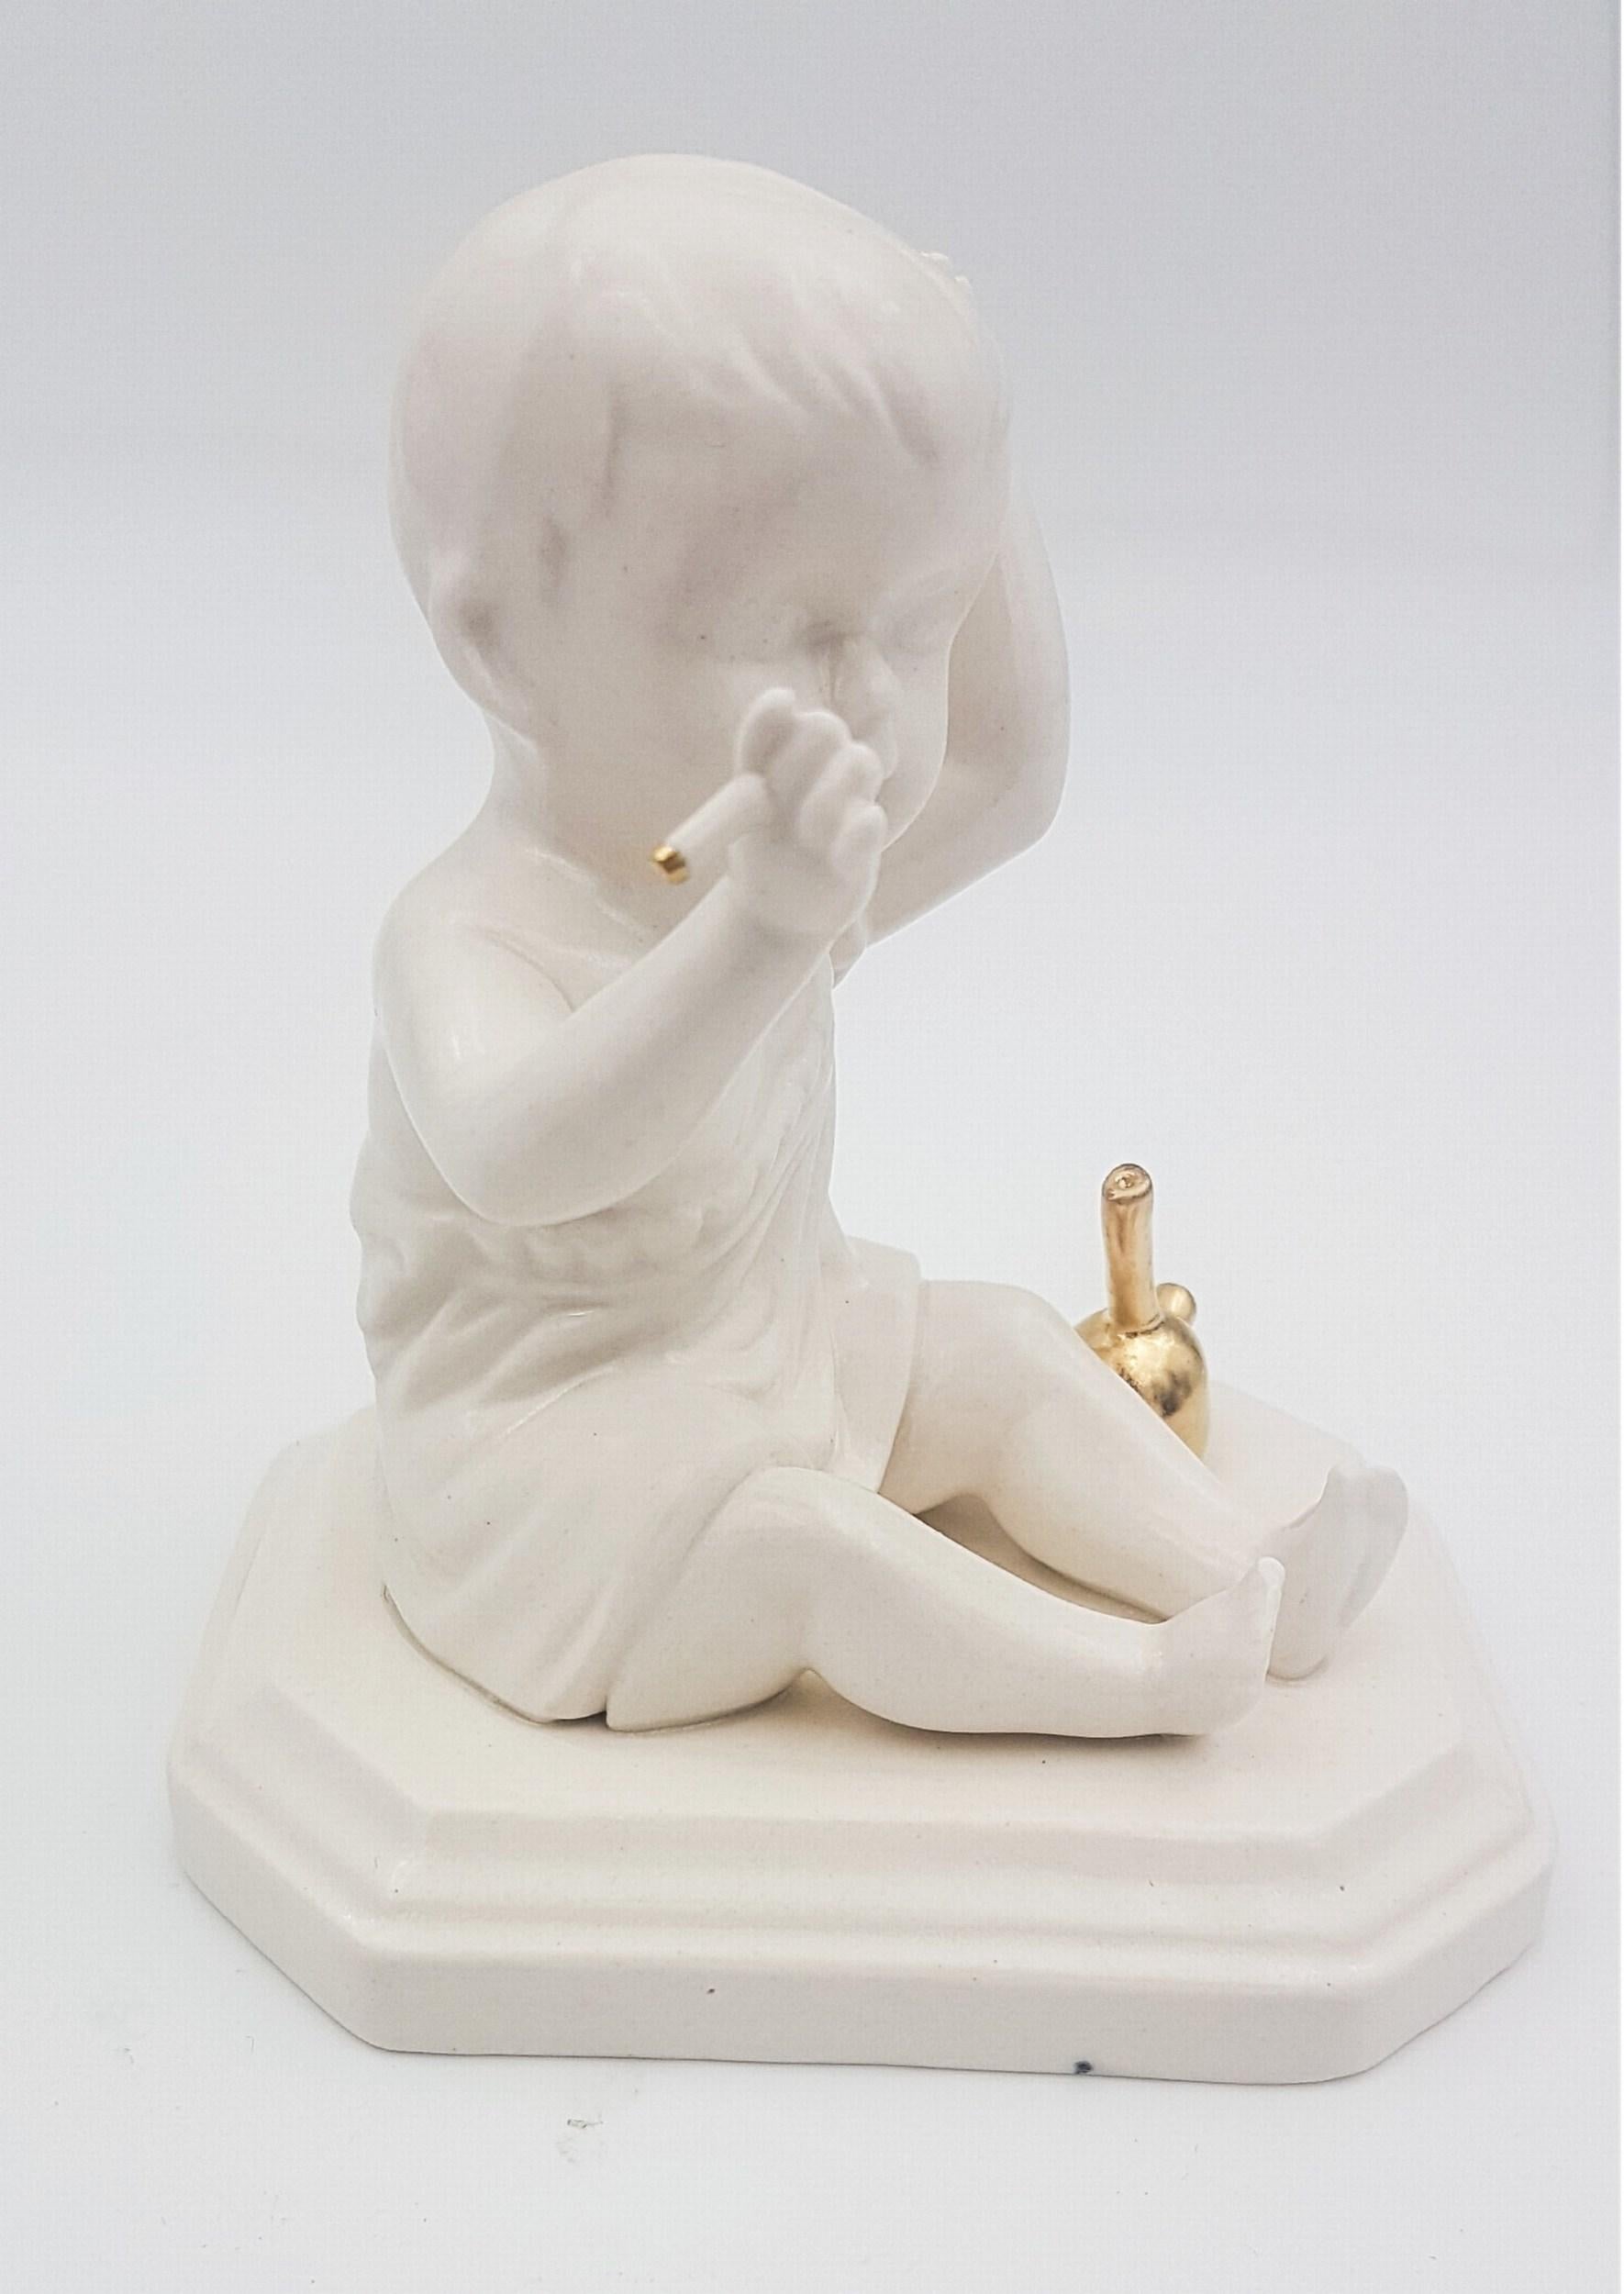 Jen Watson
Bong Baby II
Year: 2021
Medium: Porcelain, Glaze, Luster 
Size: 5 x 4.5 x 3.5 inches
Signed
Gallery COA included

About Jen Watson:

My figurines exist somewhere between relic and homage, honoring the tradition of the figurine and